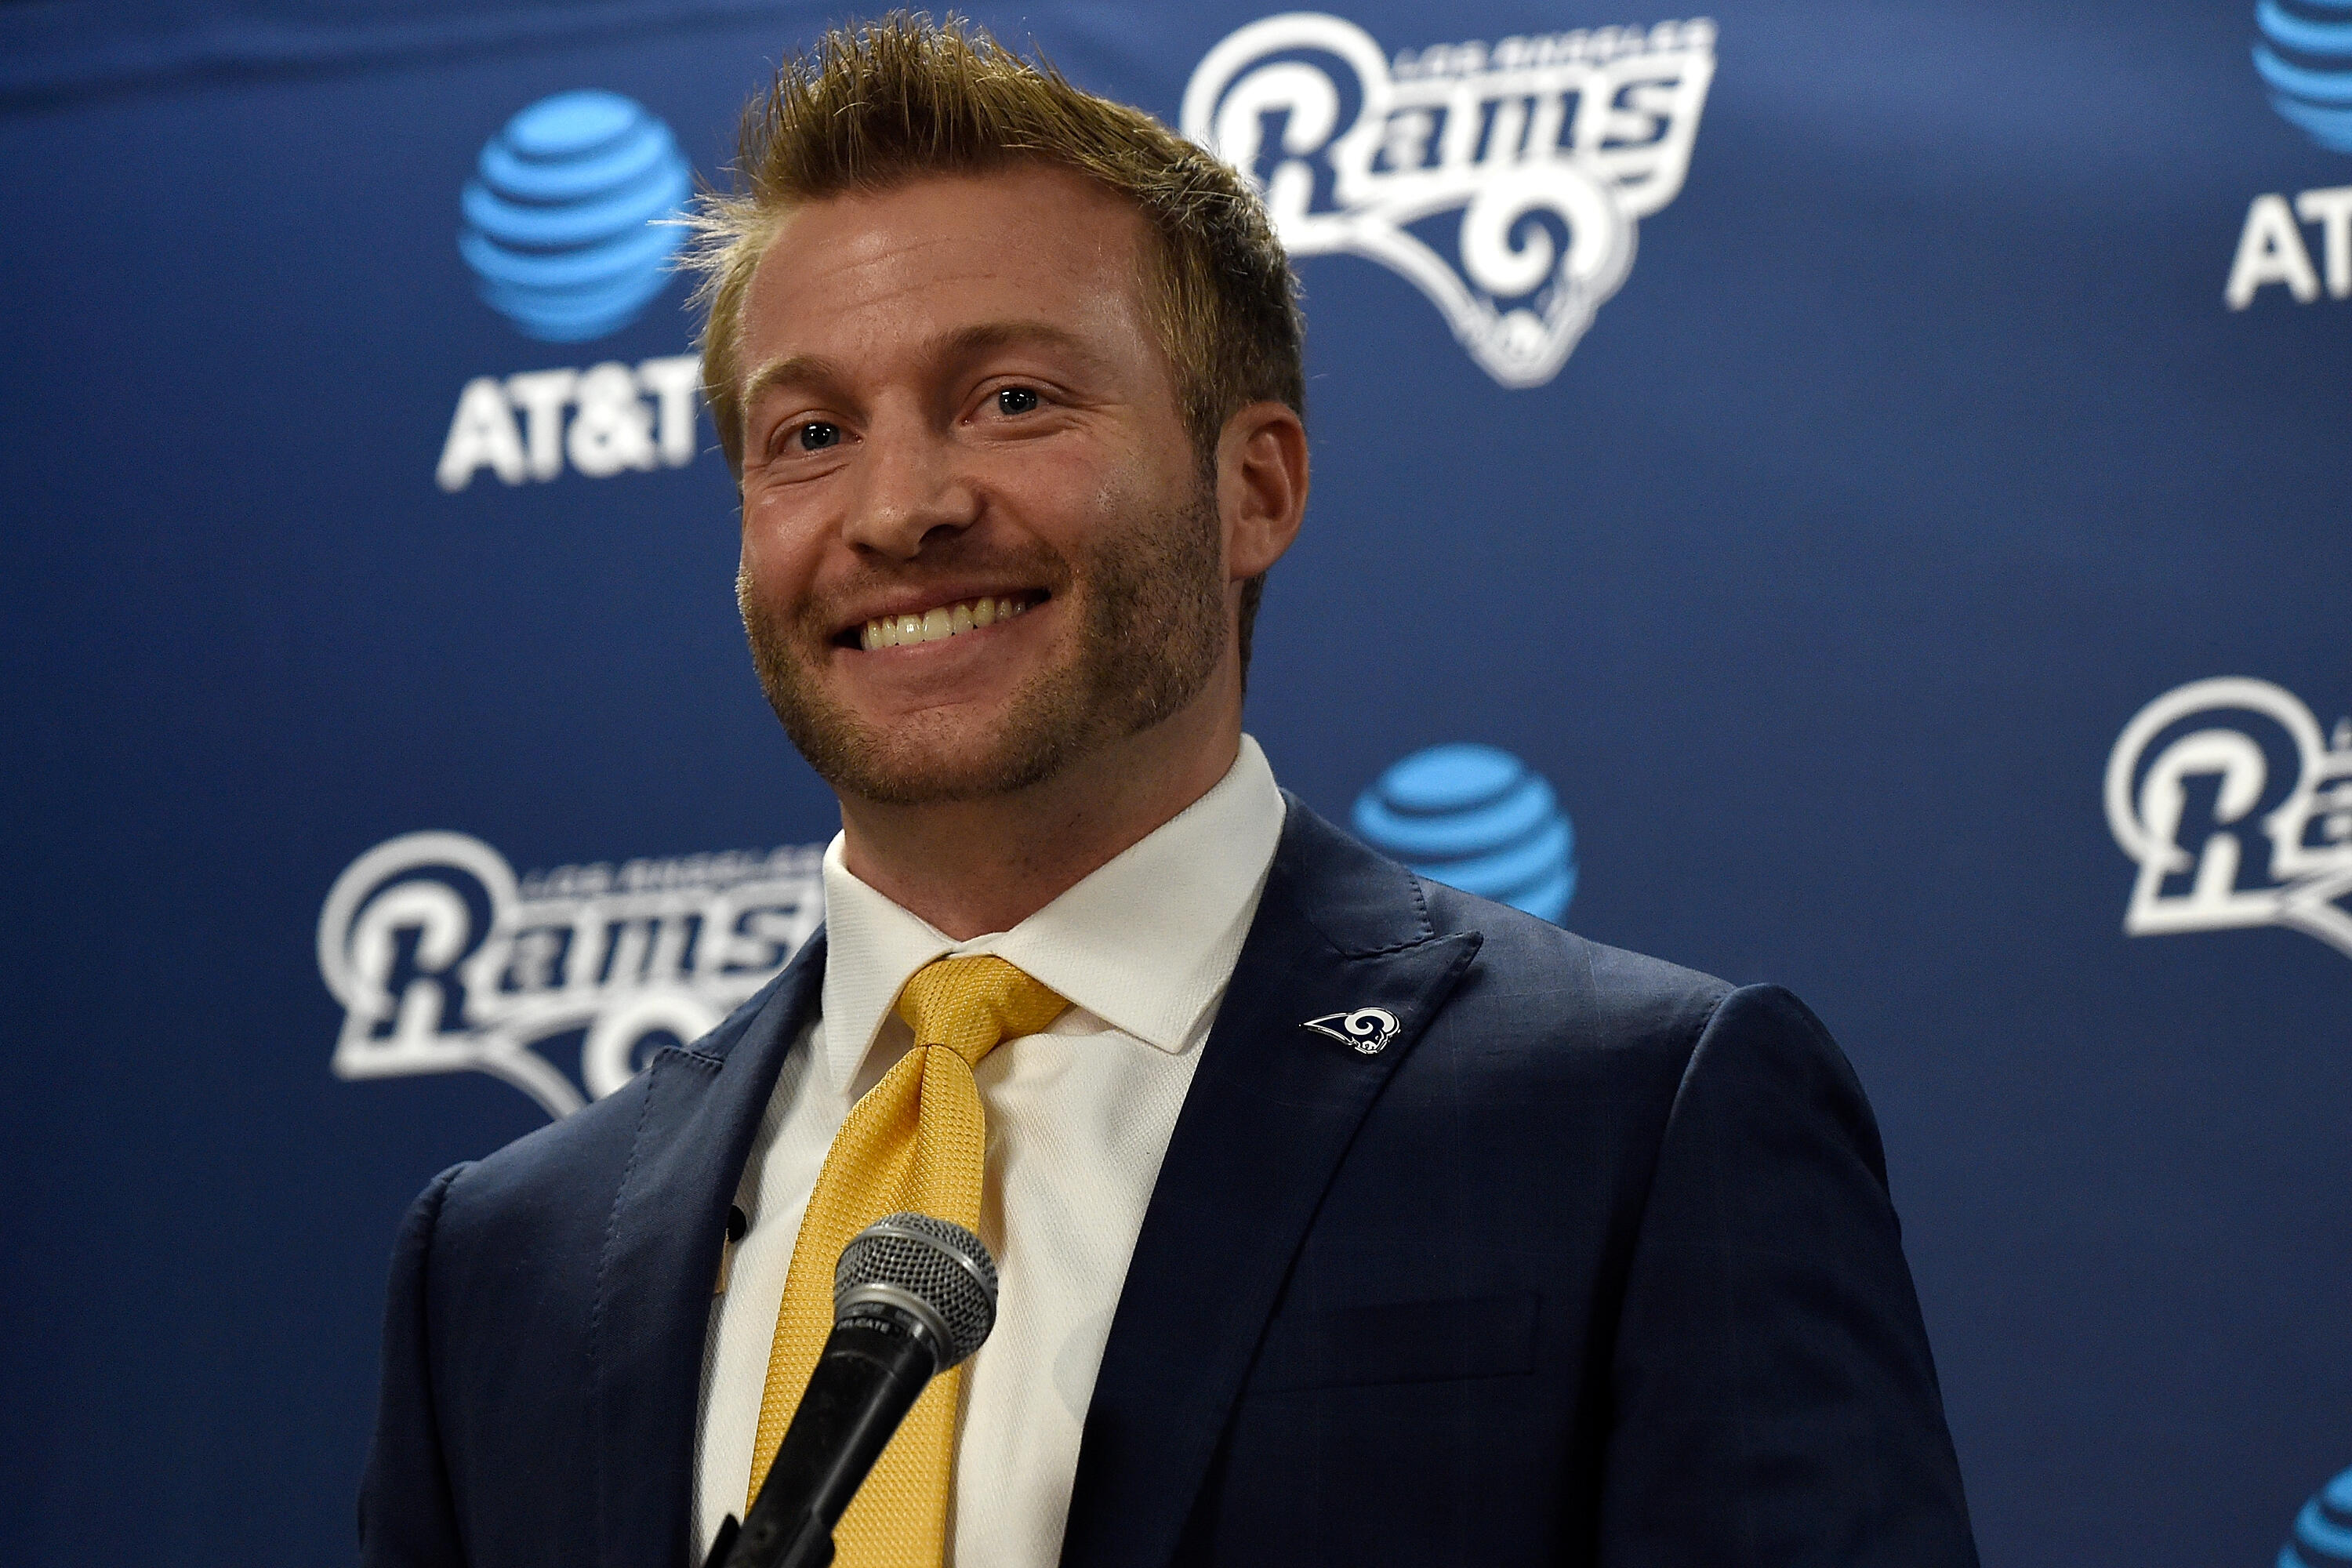 THOUSAND OAKS, CA - JANUARY 13:  The Los Angeles Rams announce today in a press conference the hiring of new head coach Sean McVay on January 13, 2017 in Thousand Oaks, California. McVay is the youngest head coach in NFL history.  (Photo by Lisa Blumenfel